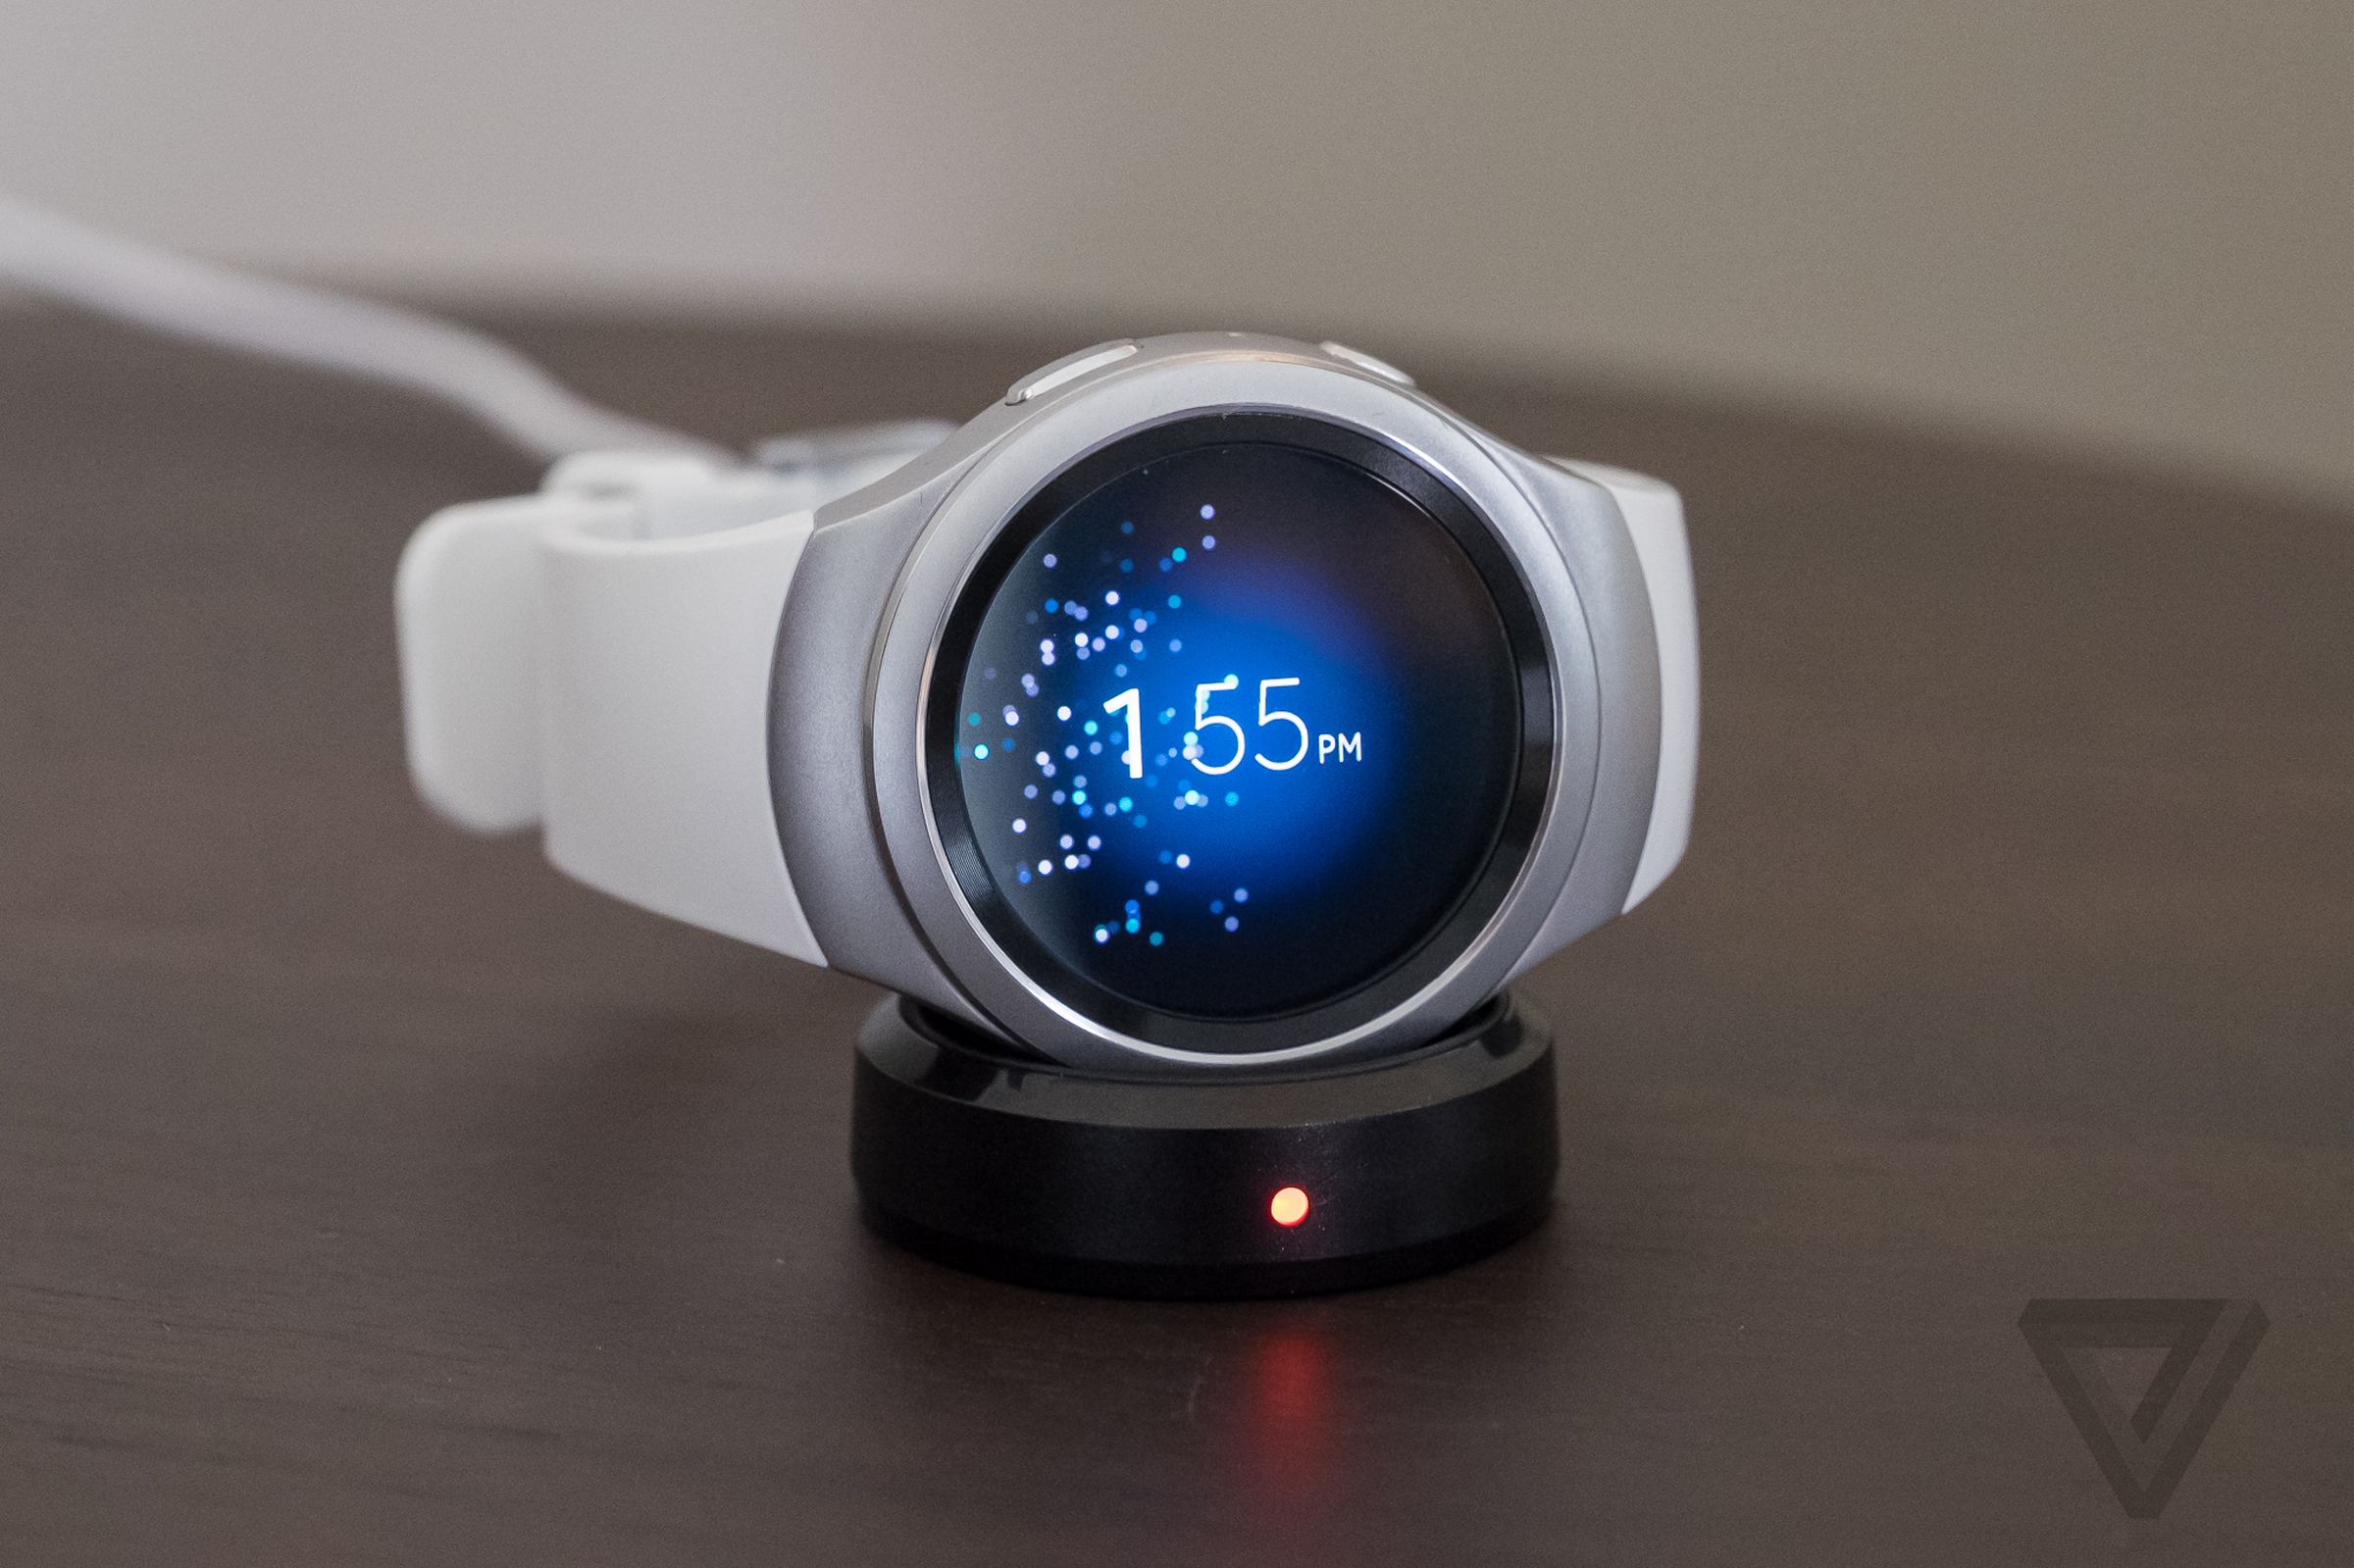 Samsung Gear S2 hands-on images